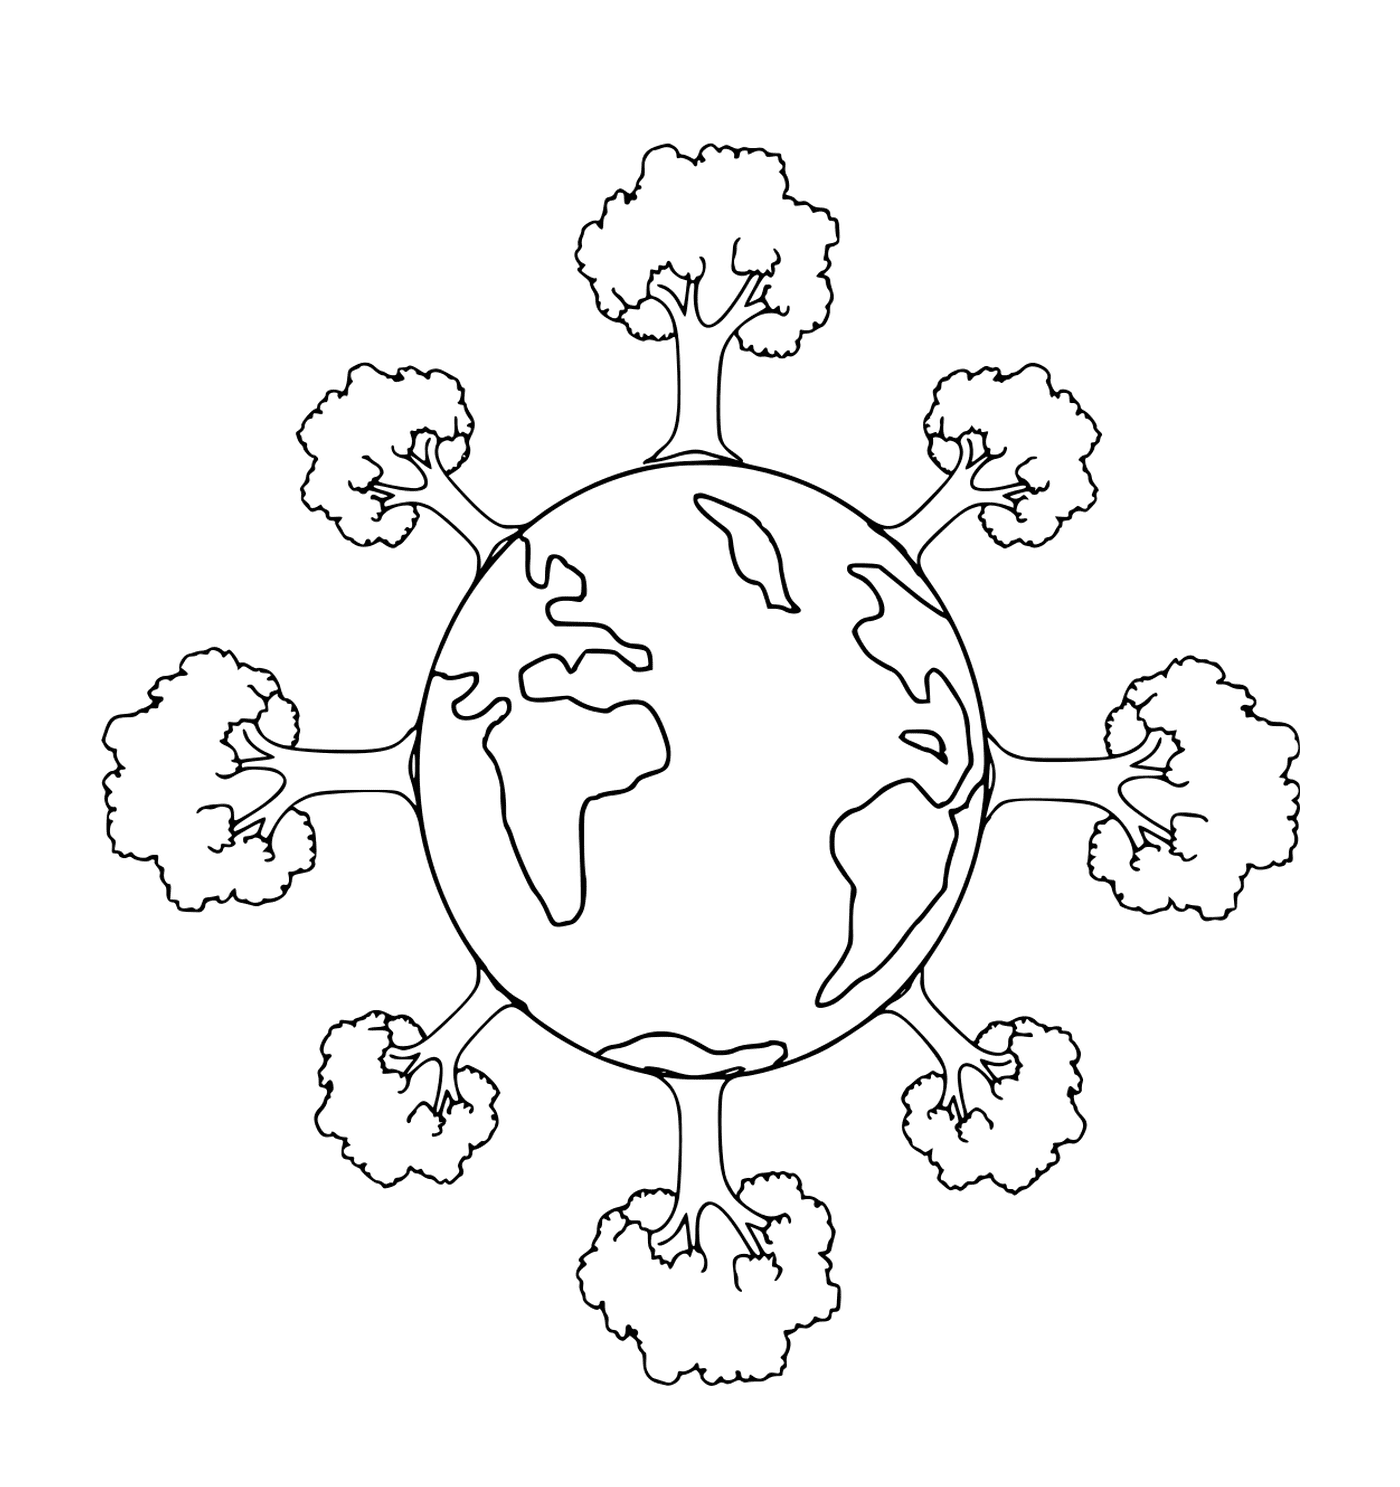  Earth Day: Planet surrounded by trees 